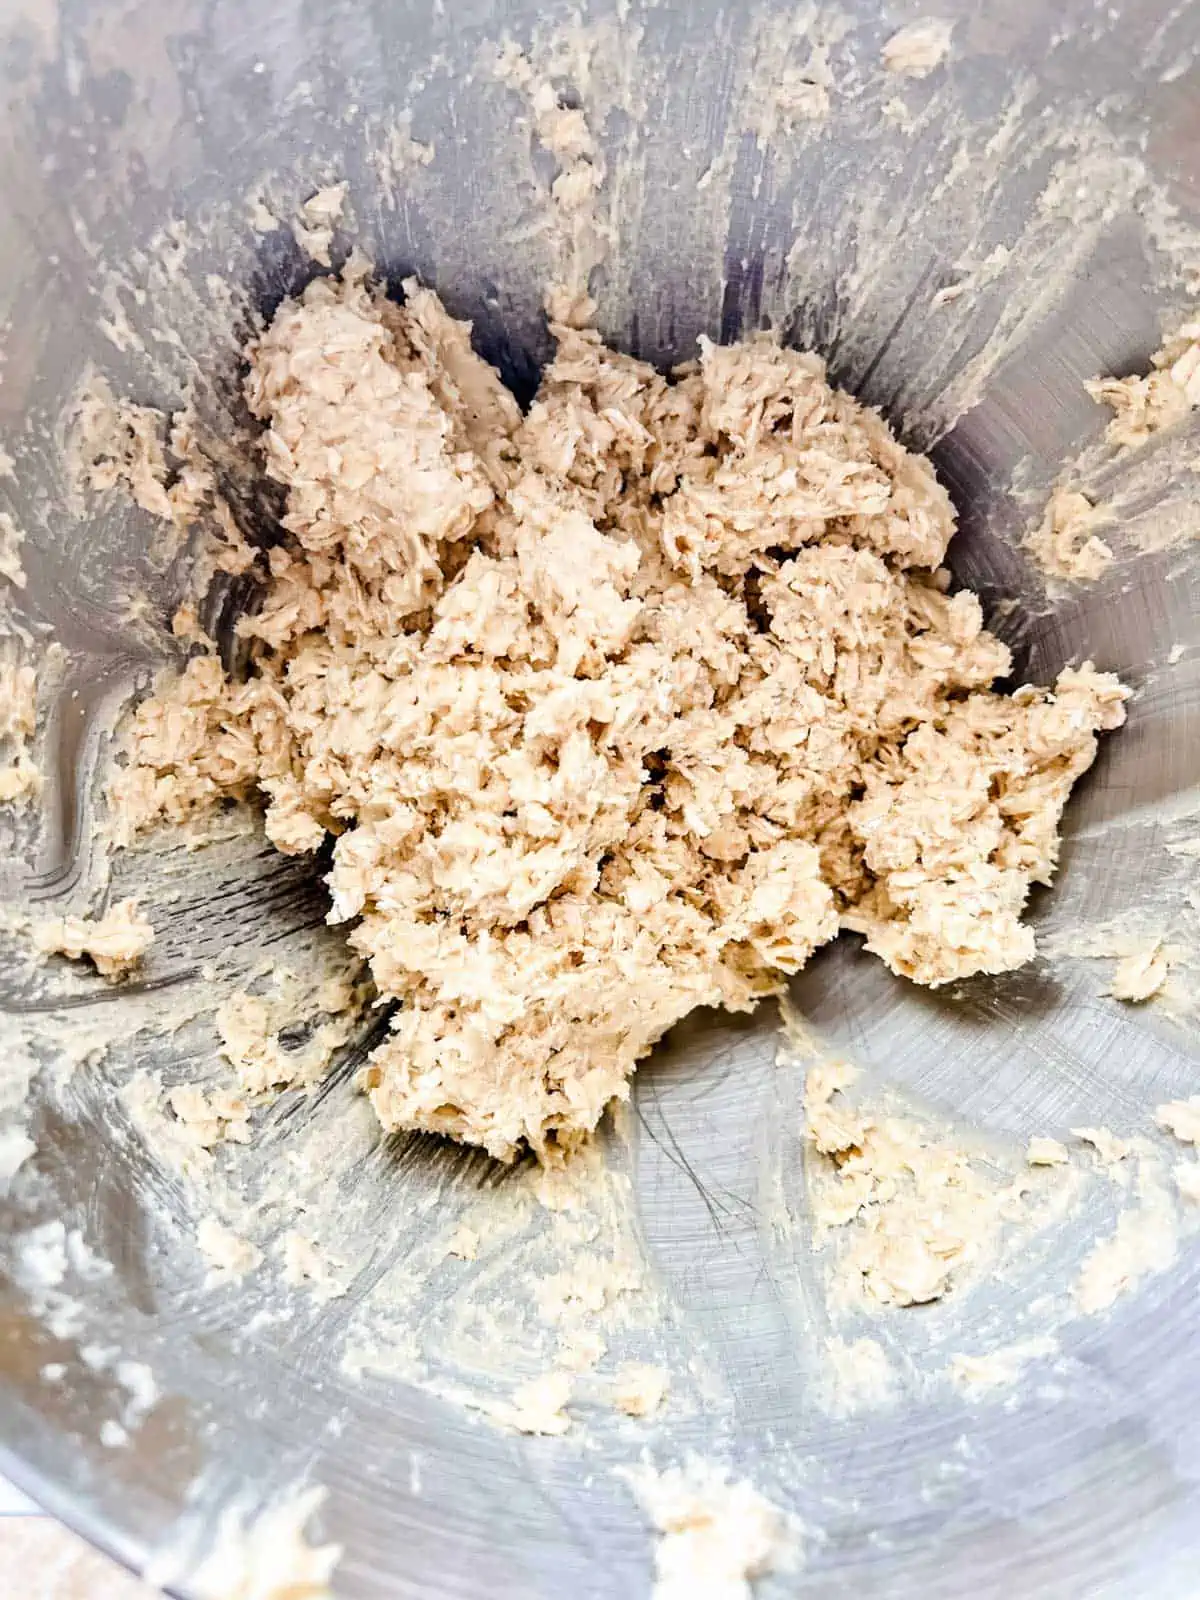 Oatmeal cookie dough in the bowl of a stand mixer.